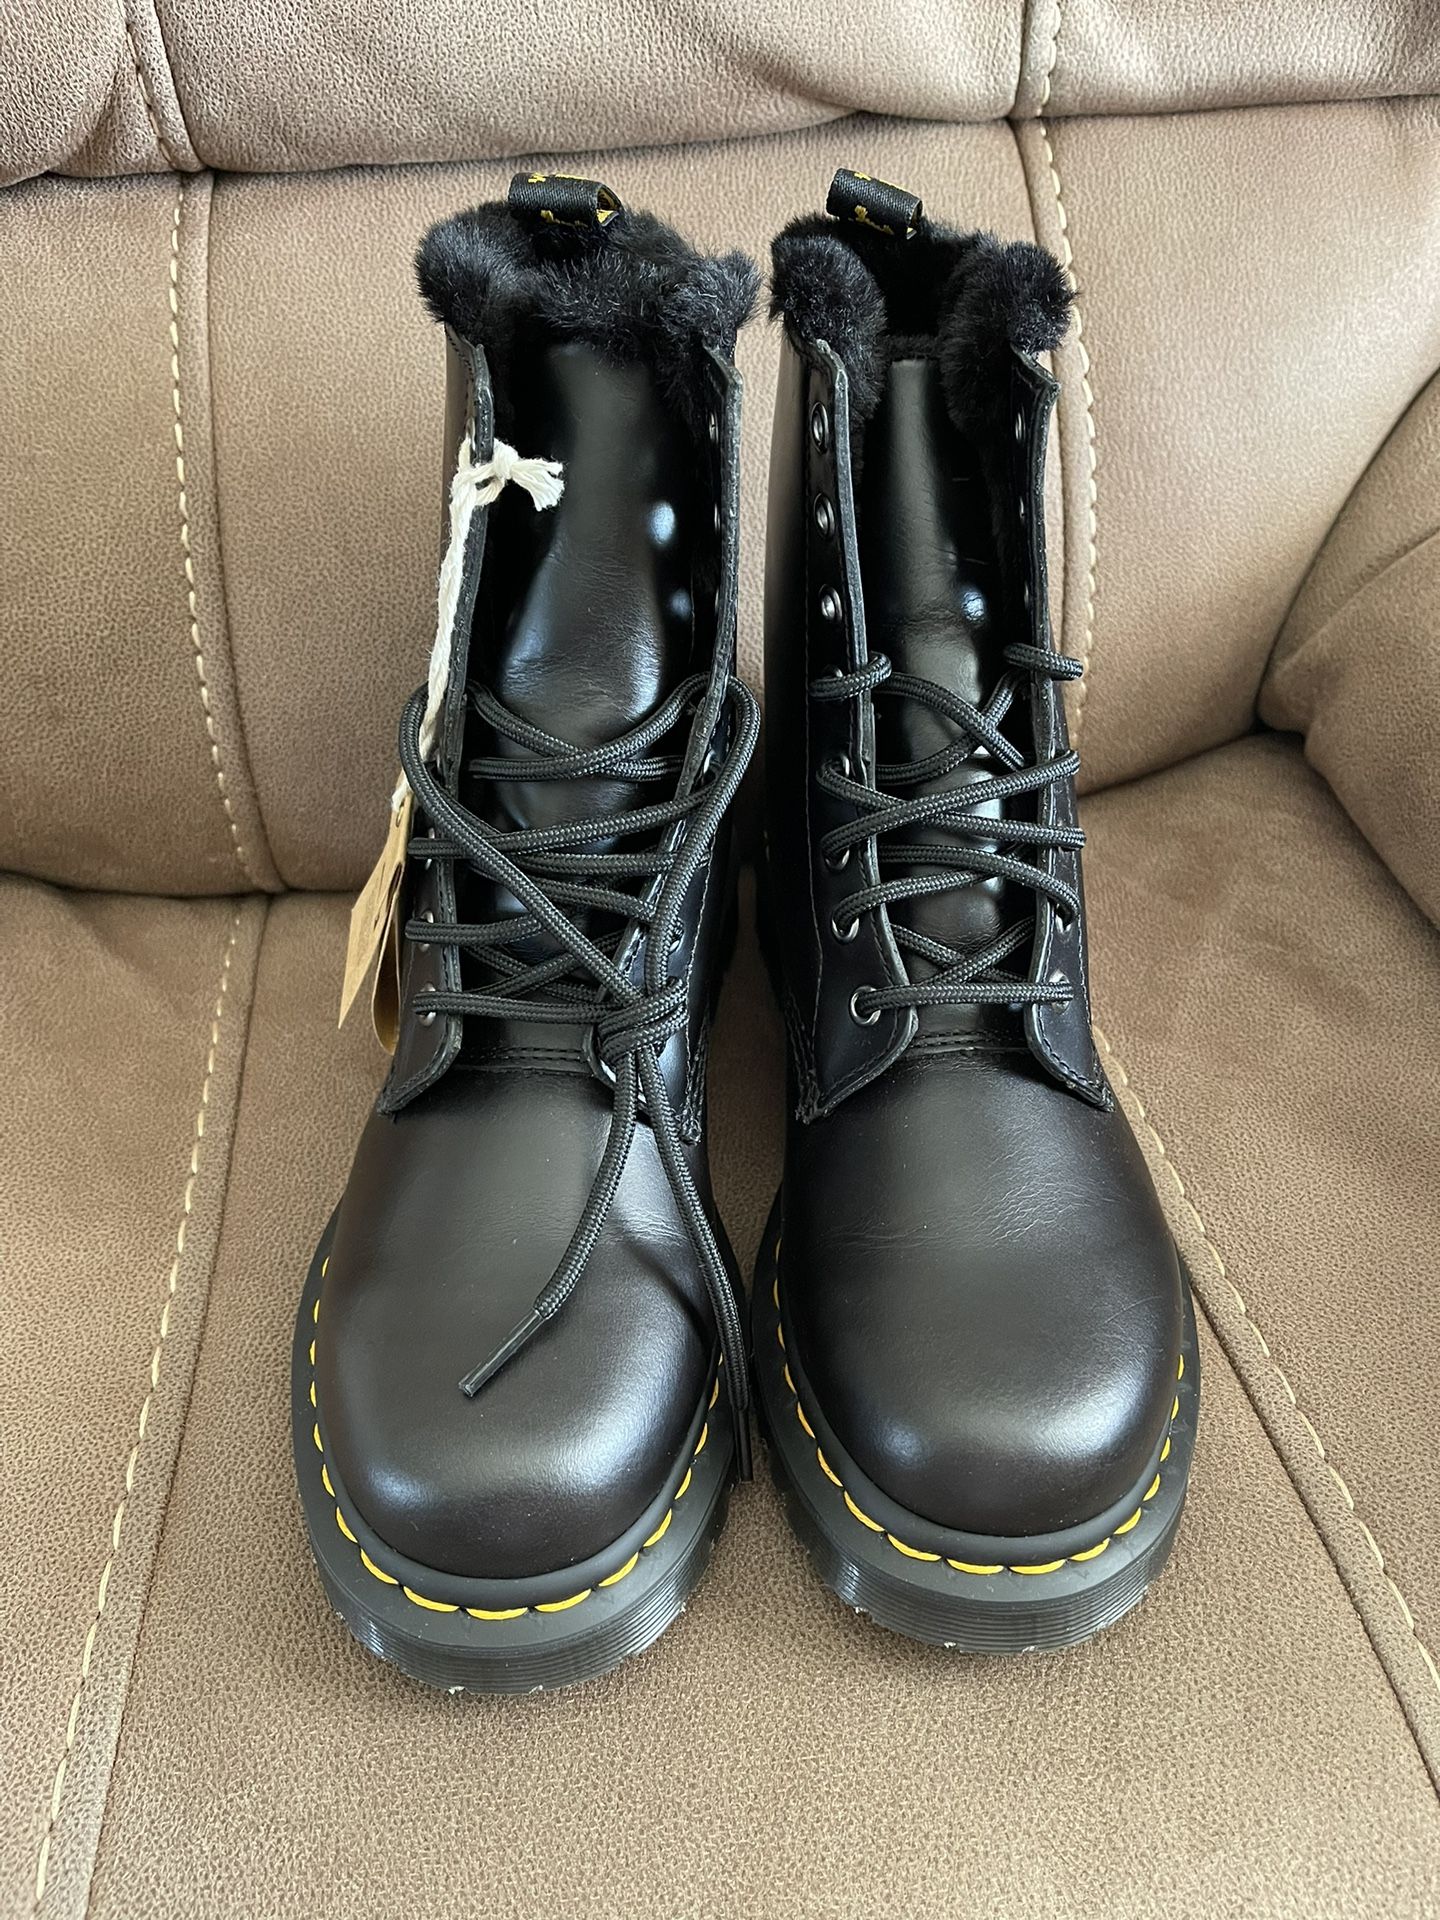 Dr Marten’s Boots With Fur Inside Size 8.